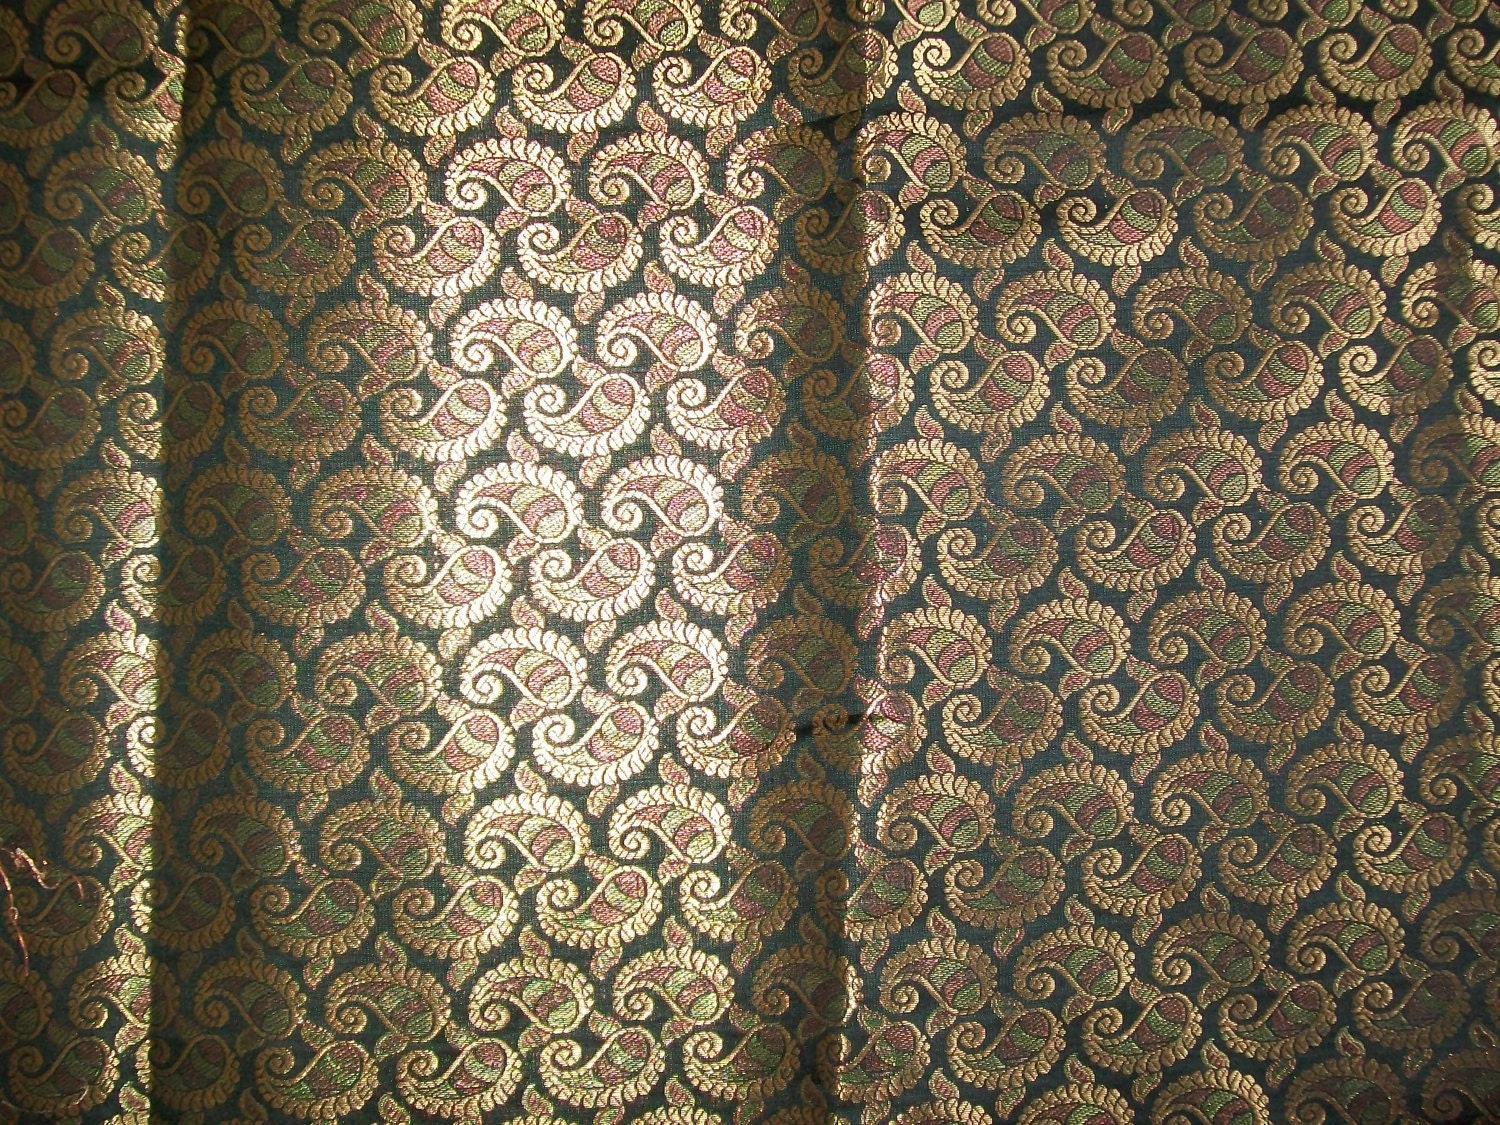 Fat quarter of Indian silk brocade fabric in black and gold